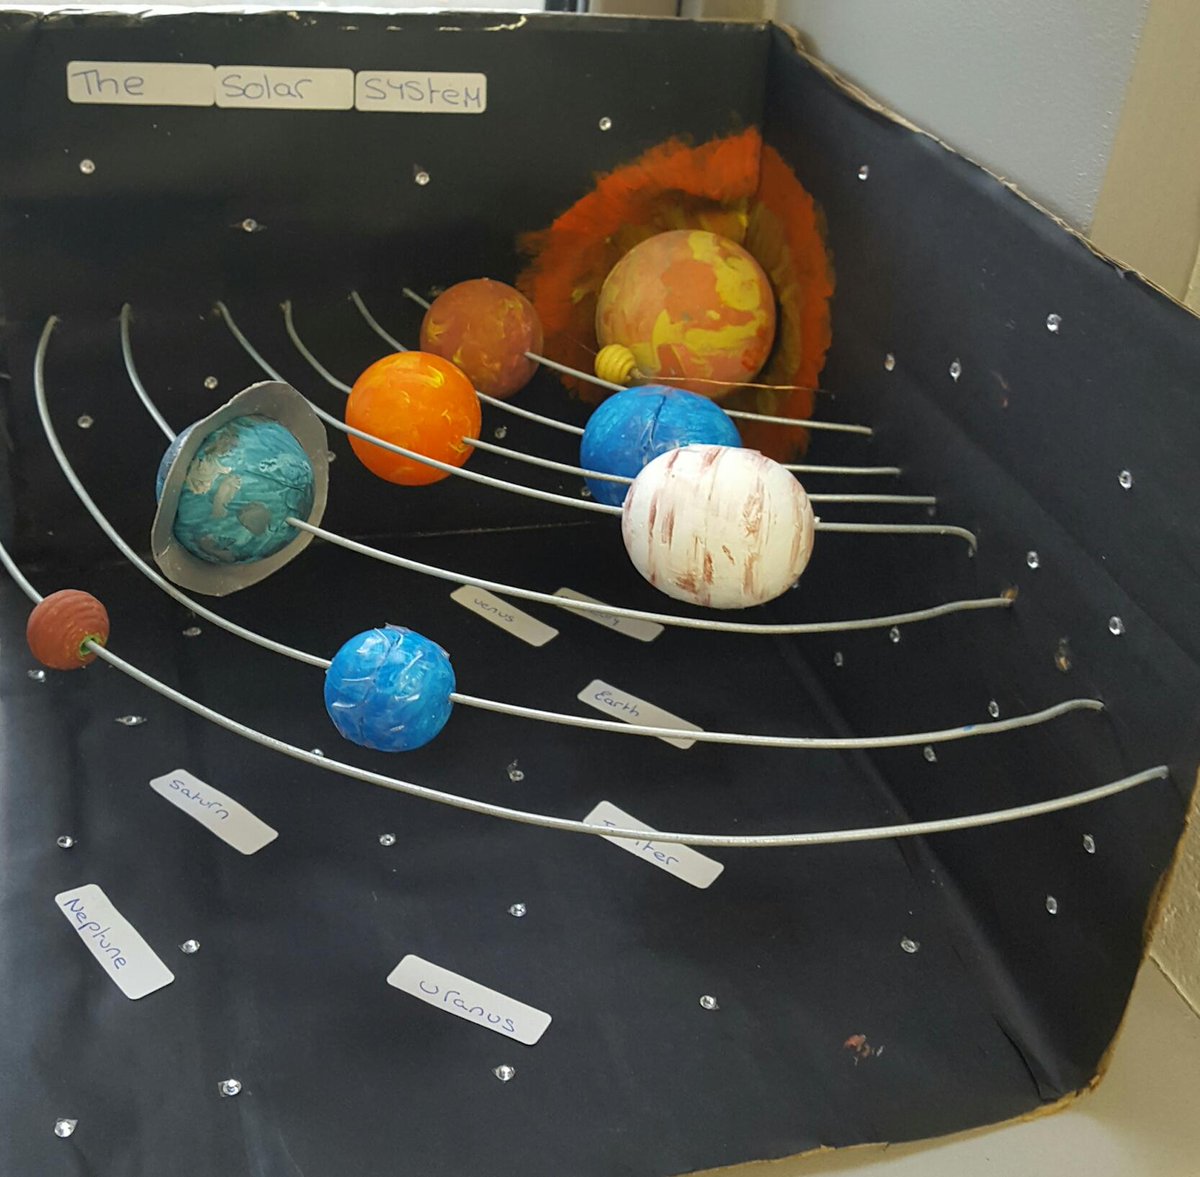 Image de Systeme solaire: Images Of Solar System Models